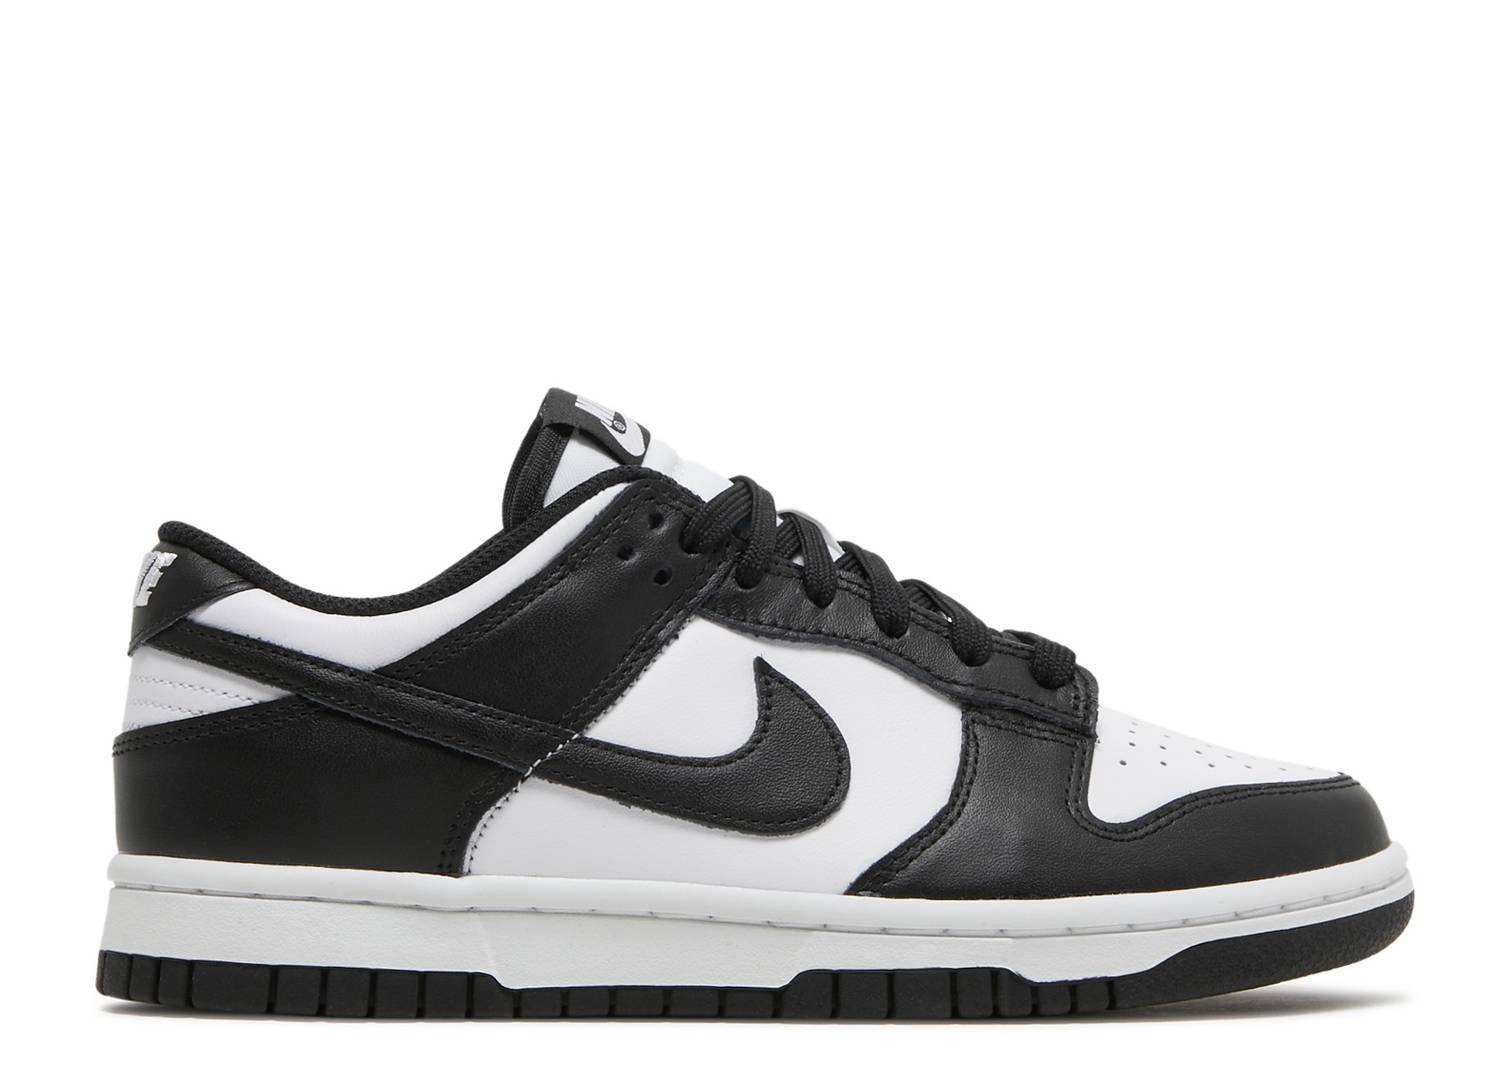 Why is everyone wearing Nike Dunk lows? The Oakland Post